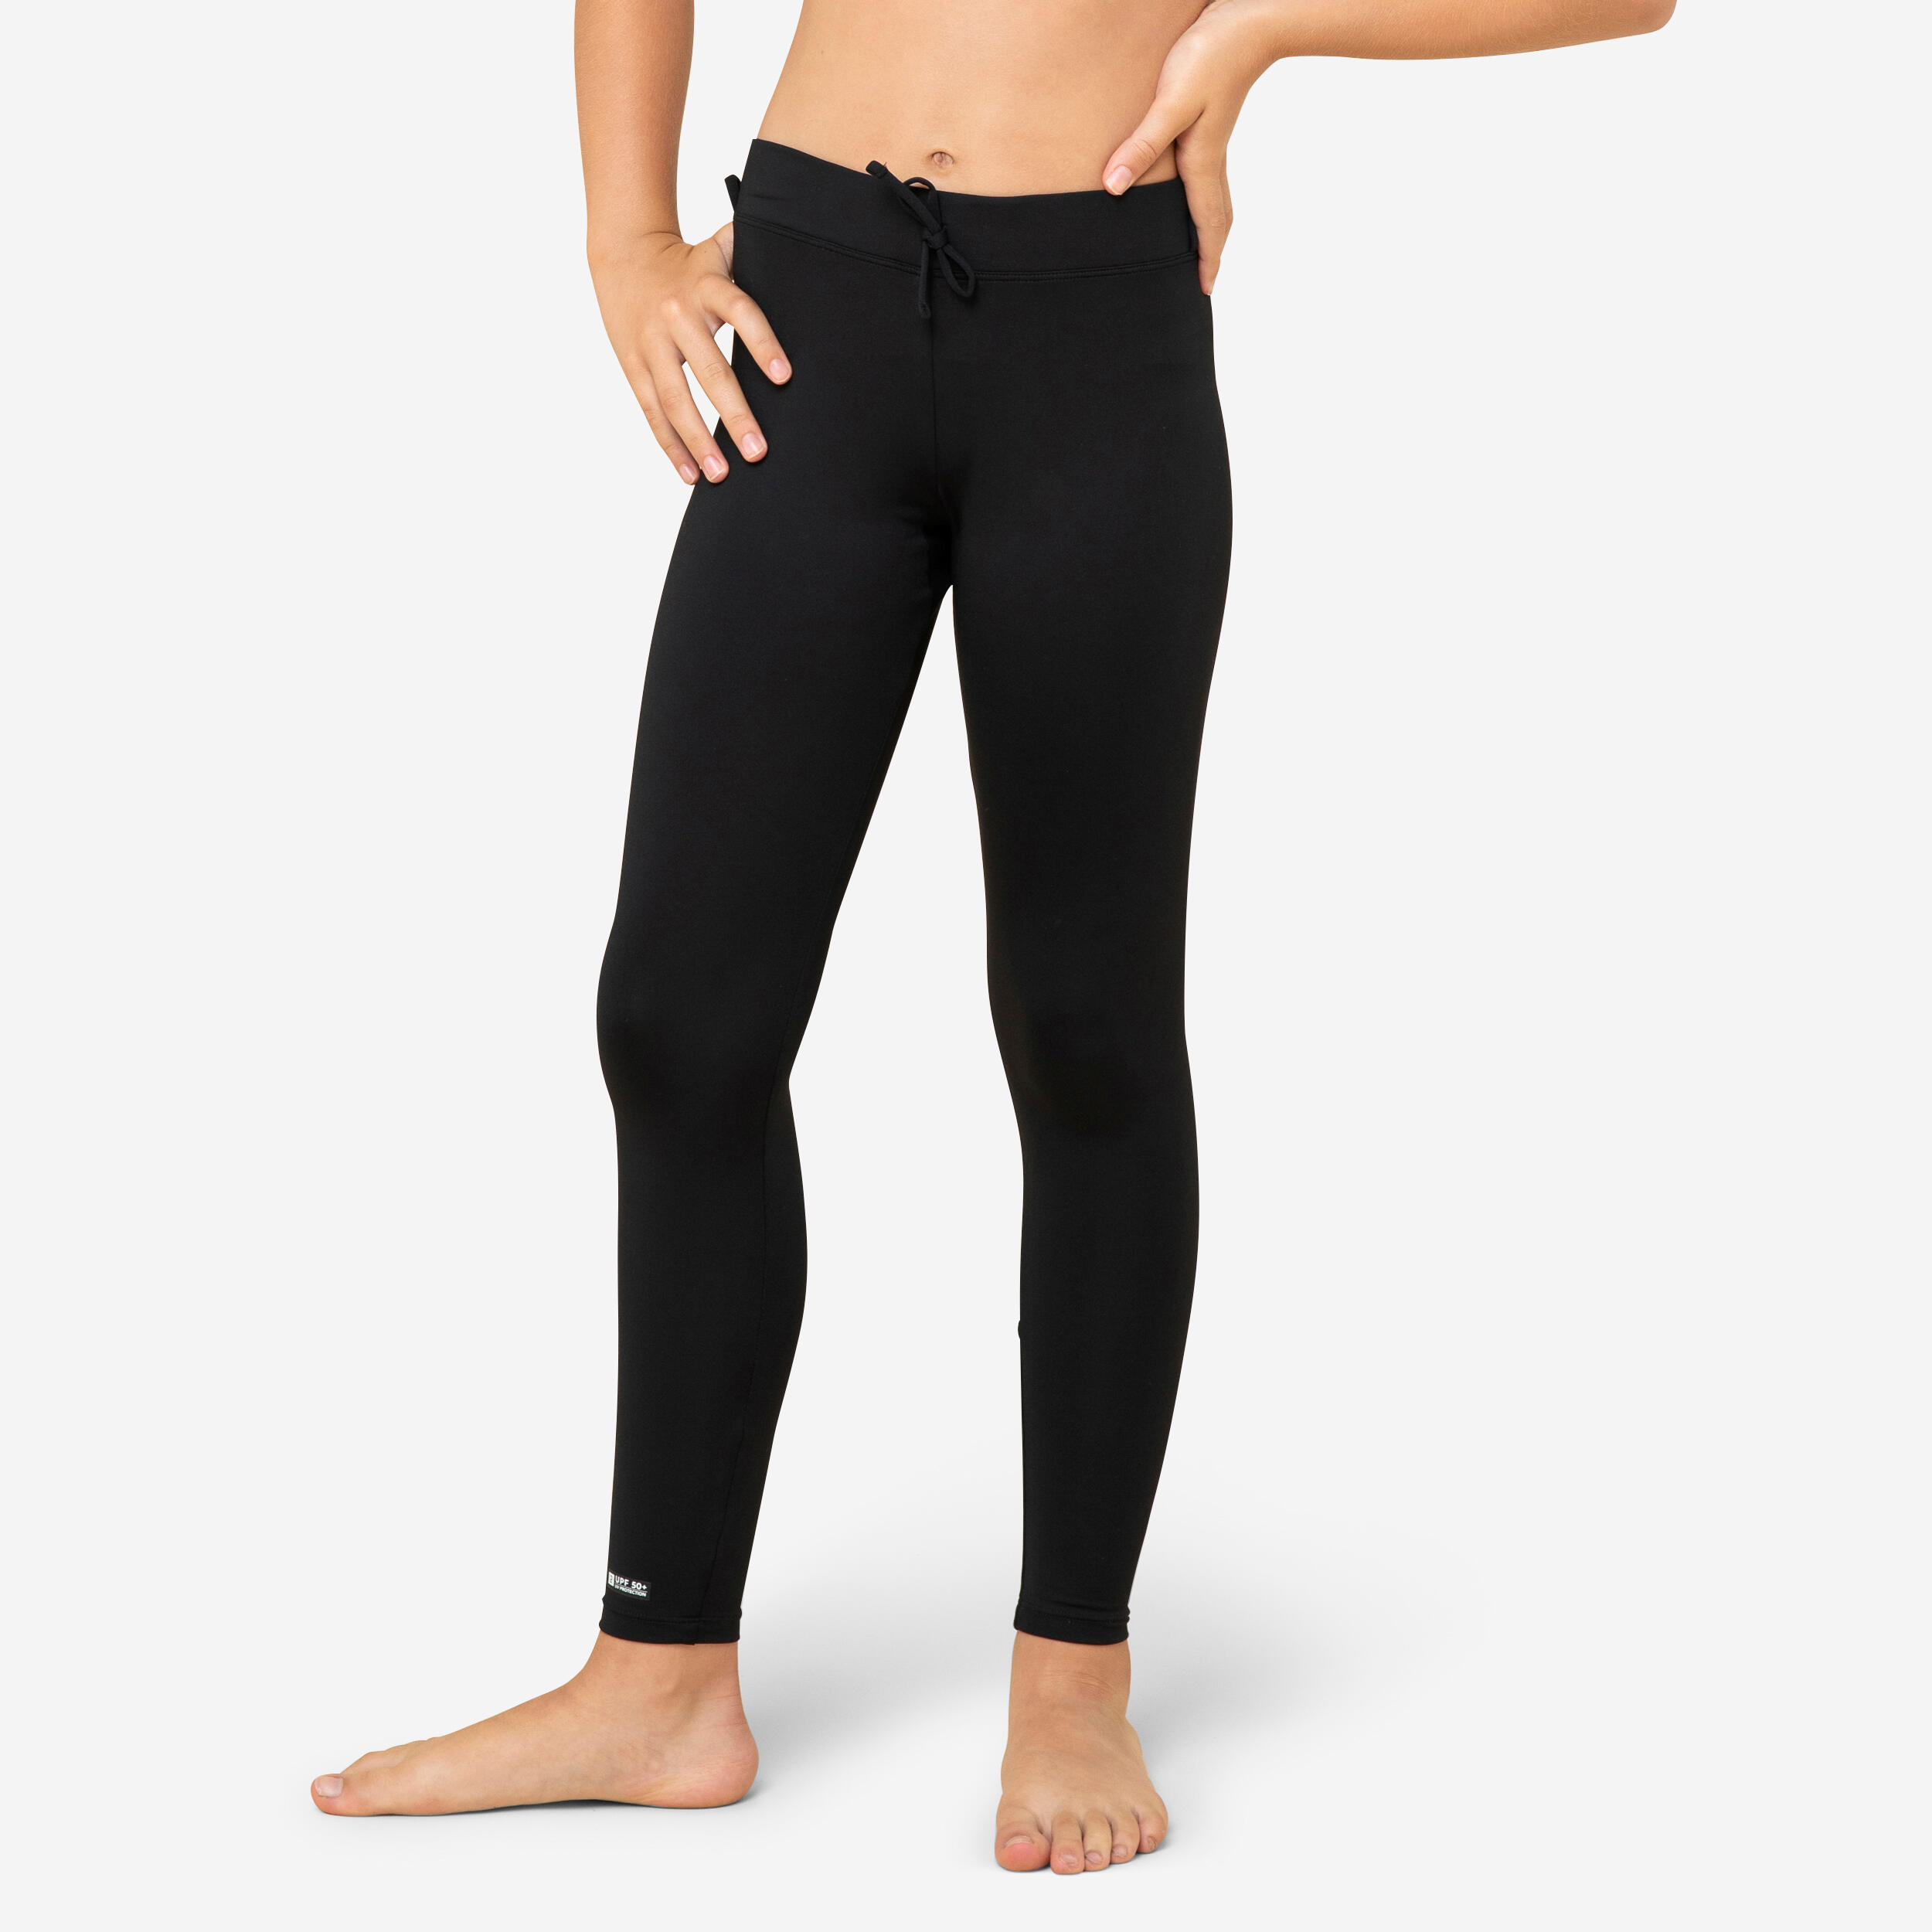 Decathlon UPF 50+ Women Water Sports Modest Legging UV Protection Surfing/  Swimming/ Snorkeling/ Diving - Olaian | Shopee Malaysia